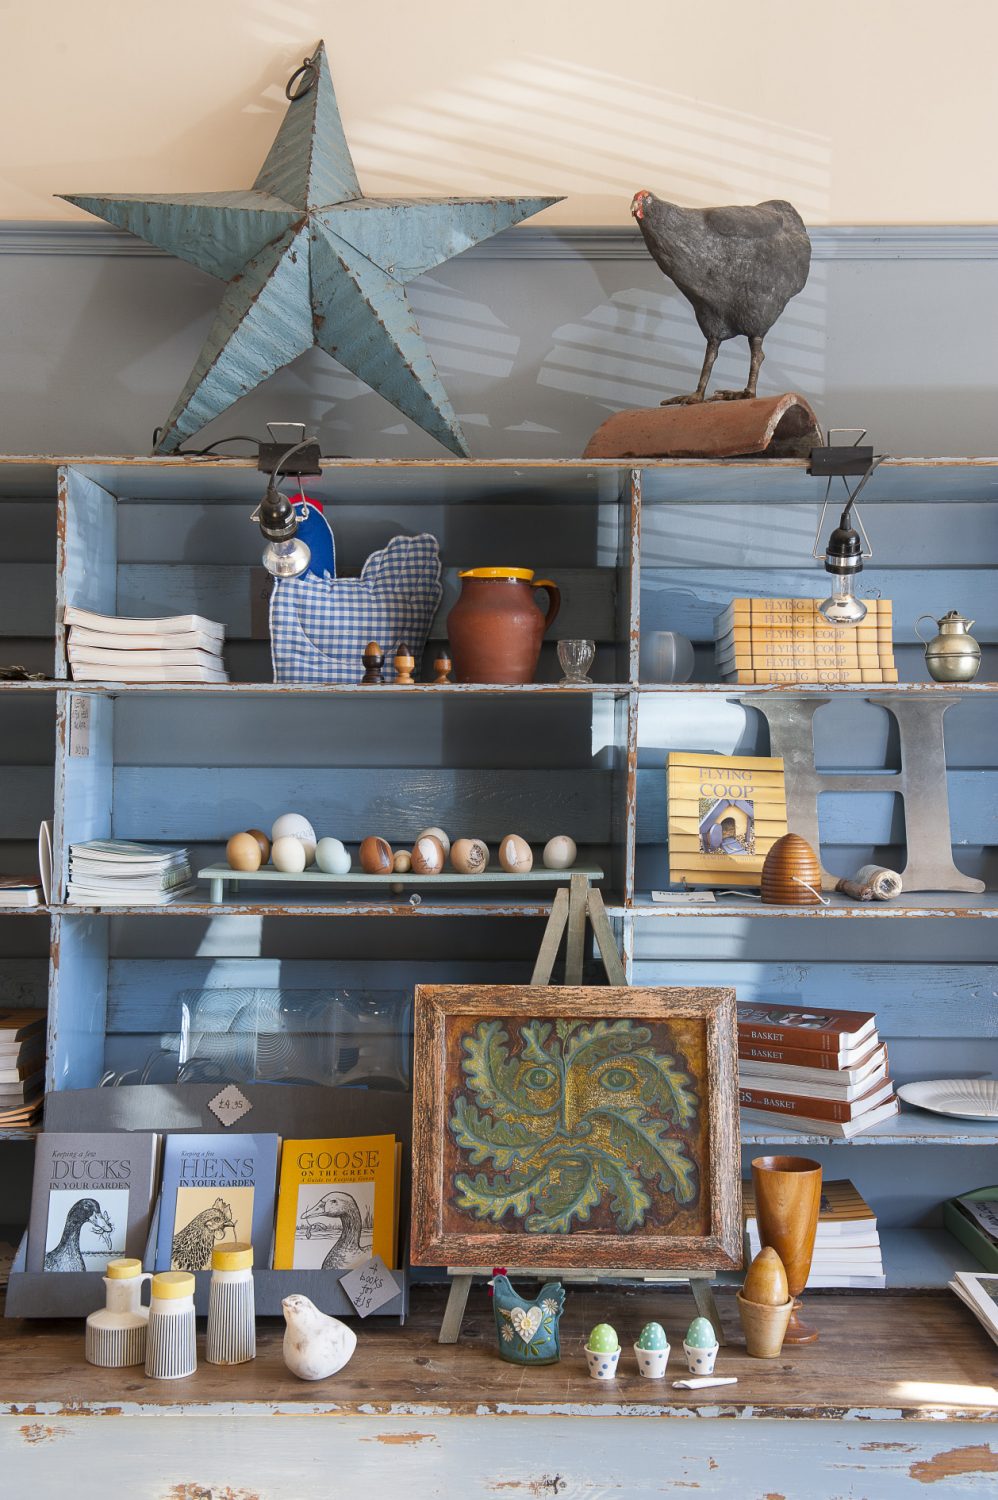 The office area turns into a pop-up shop before Christmas and in mid summer when Francine opens up her house and garden. A vast shelving unit, transported from Suffolk, displays Francine’s range of books as well as decorative items and inspiring art and craft